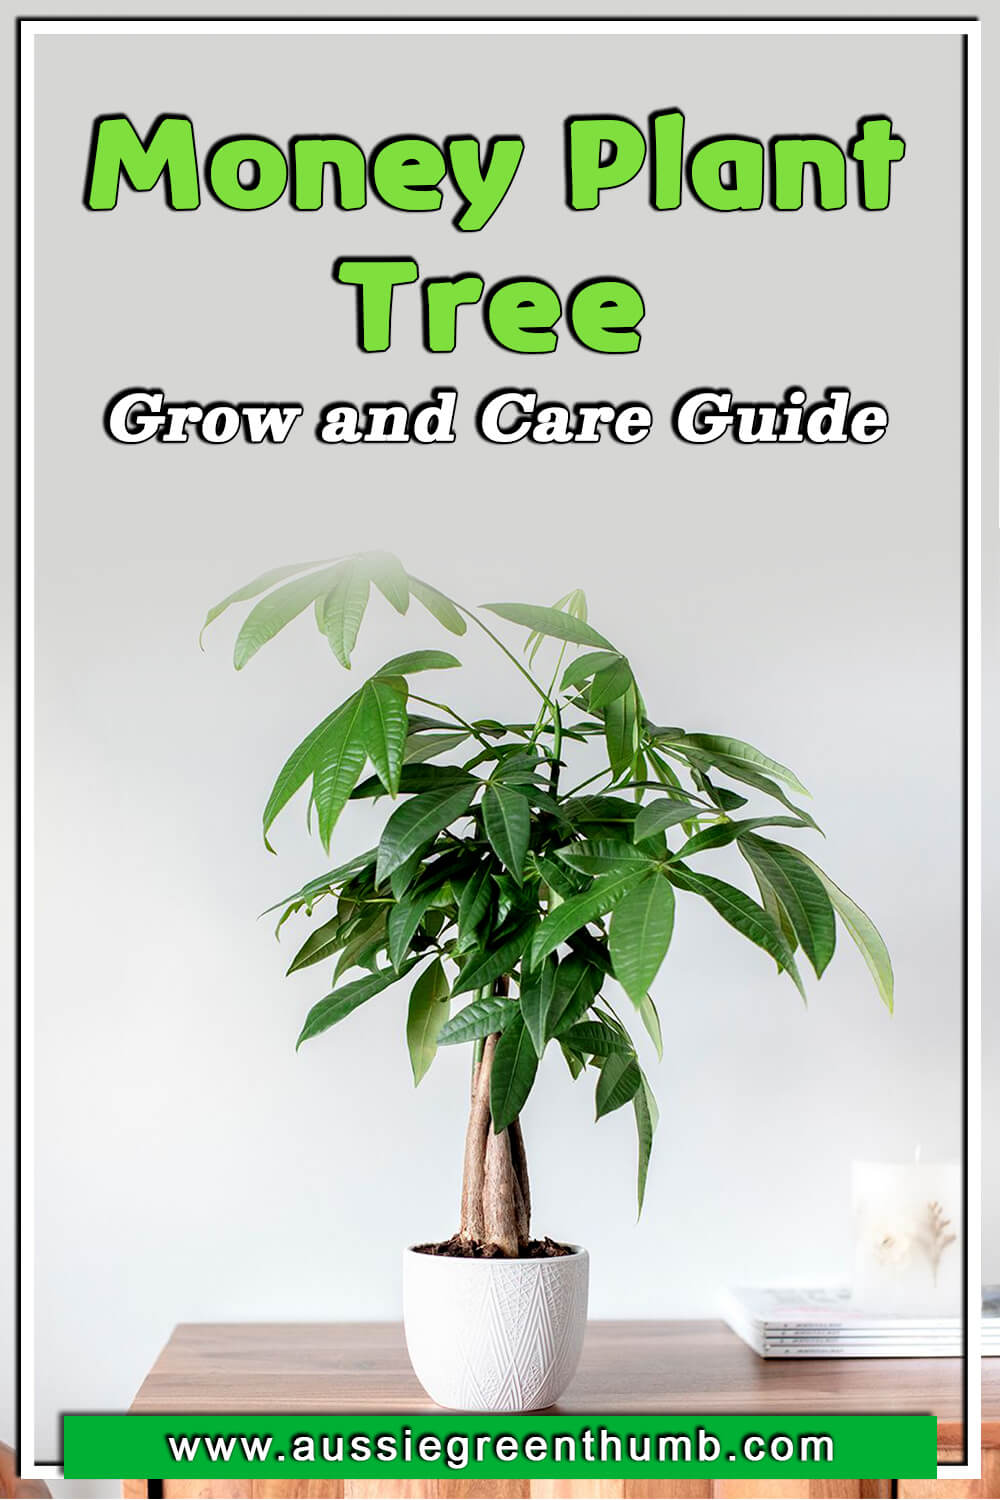 Money Plant Tree Grow and Care Guide